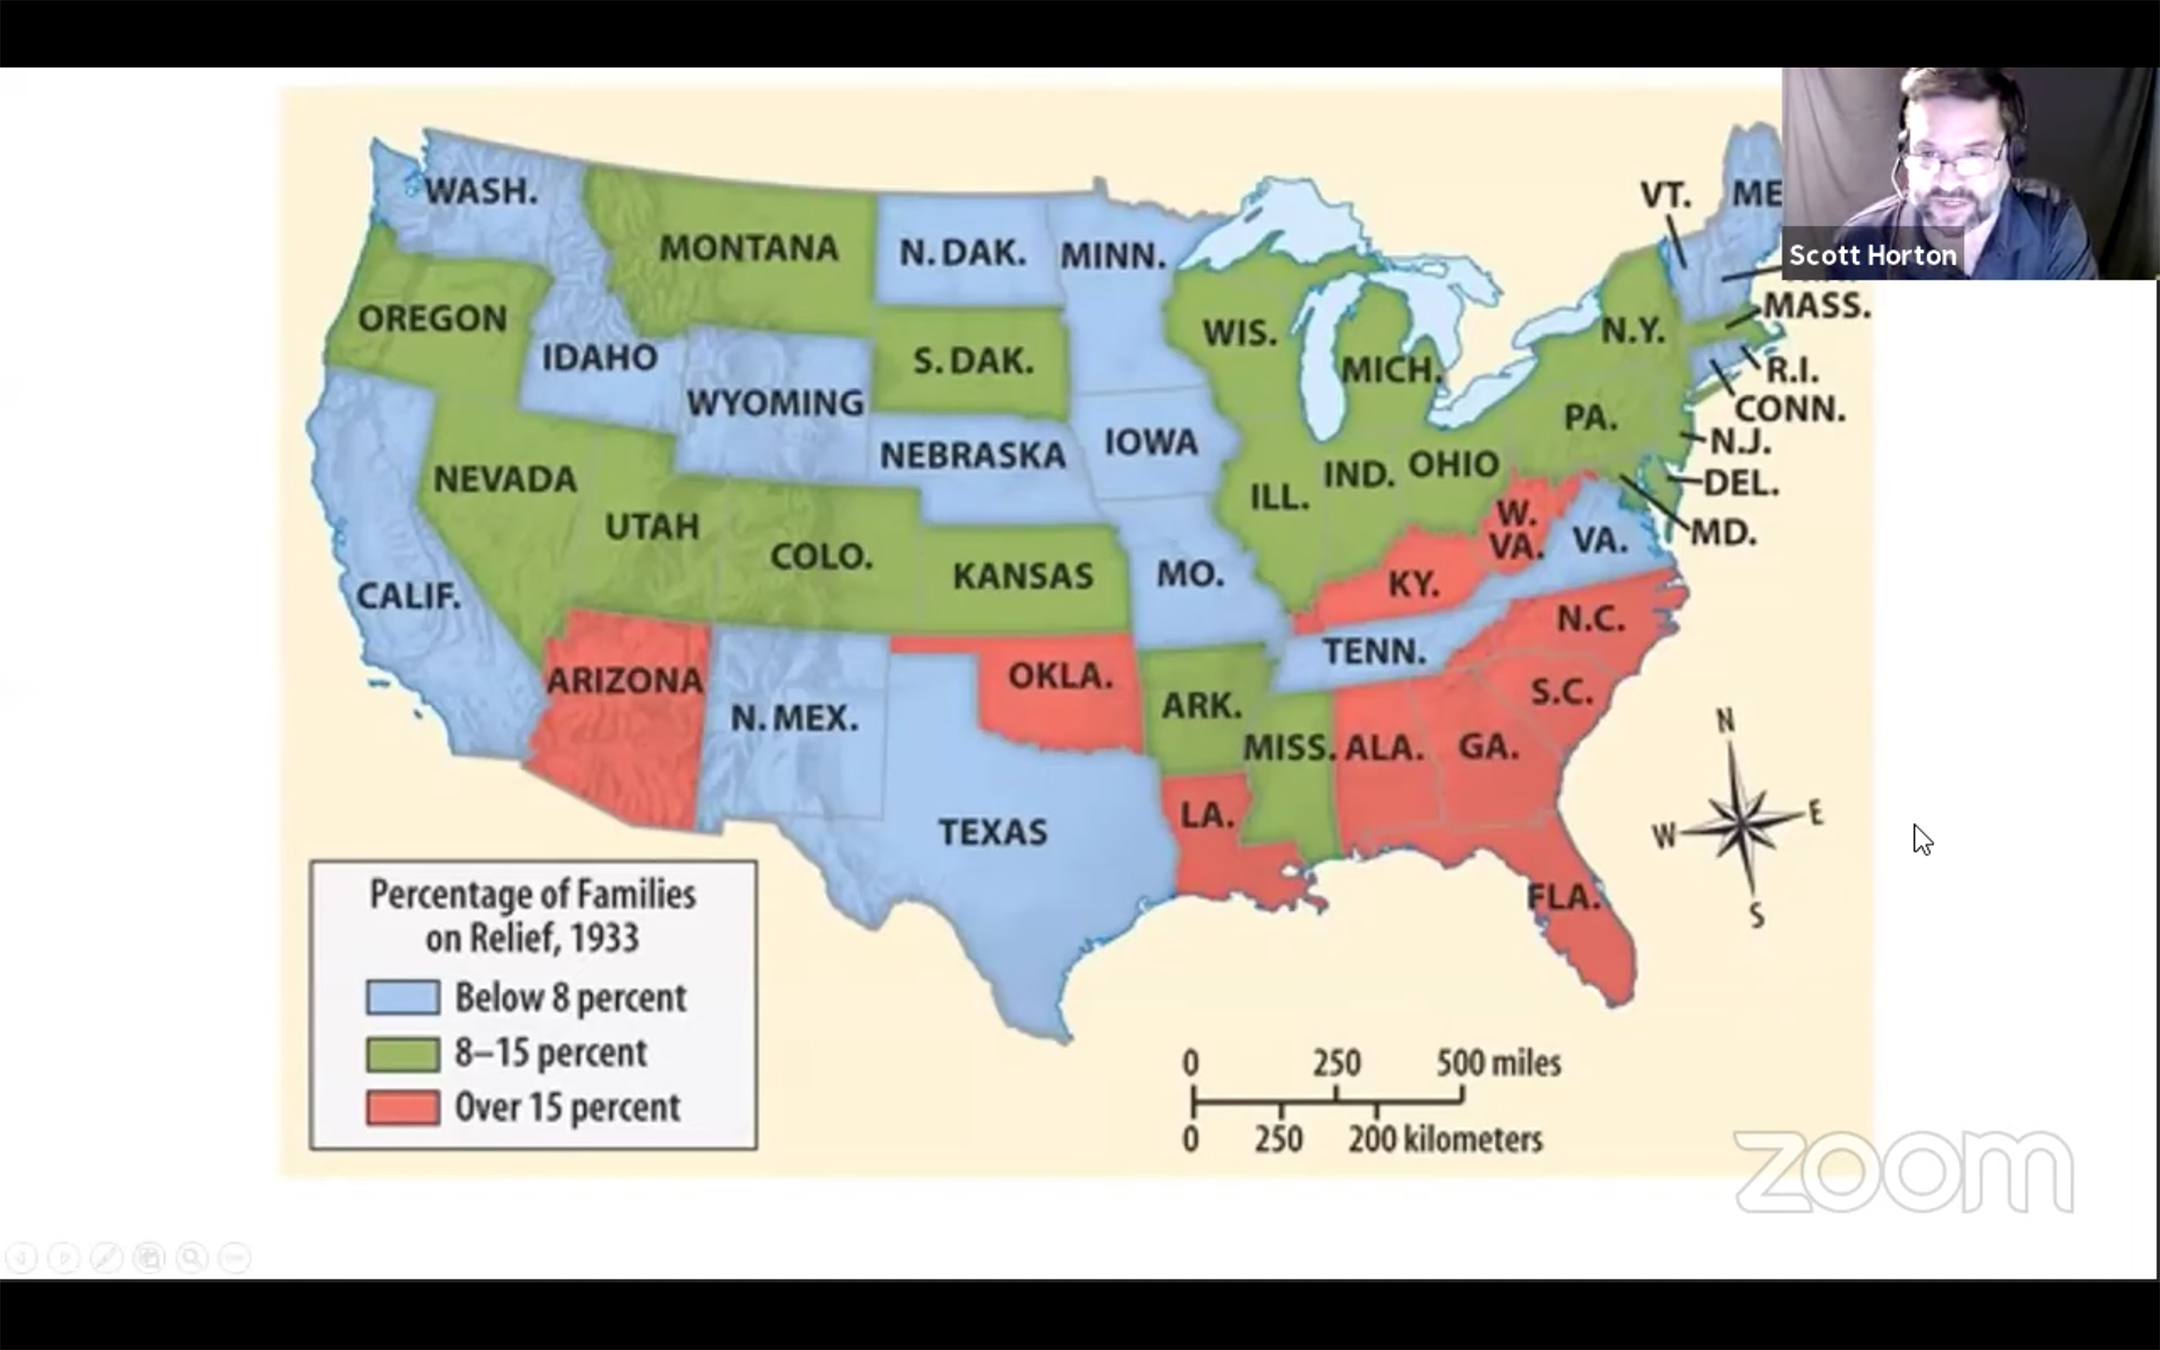 screenshot of a lesson taught by ap u.s. history teacher scott horton featuring a map of the united states with different states represented in different colors based on how much relief they received in 1933